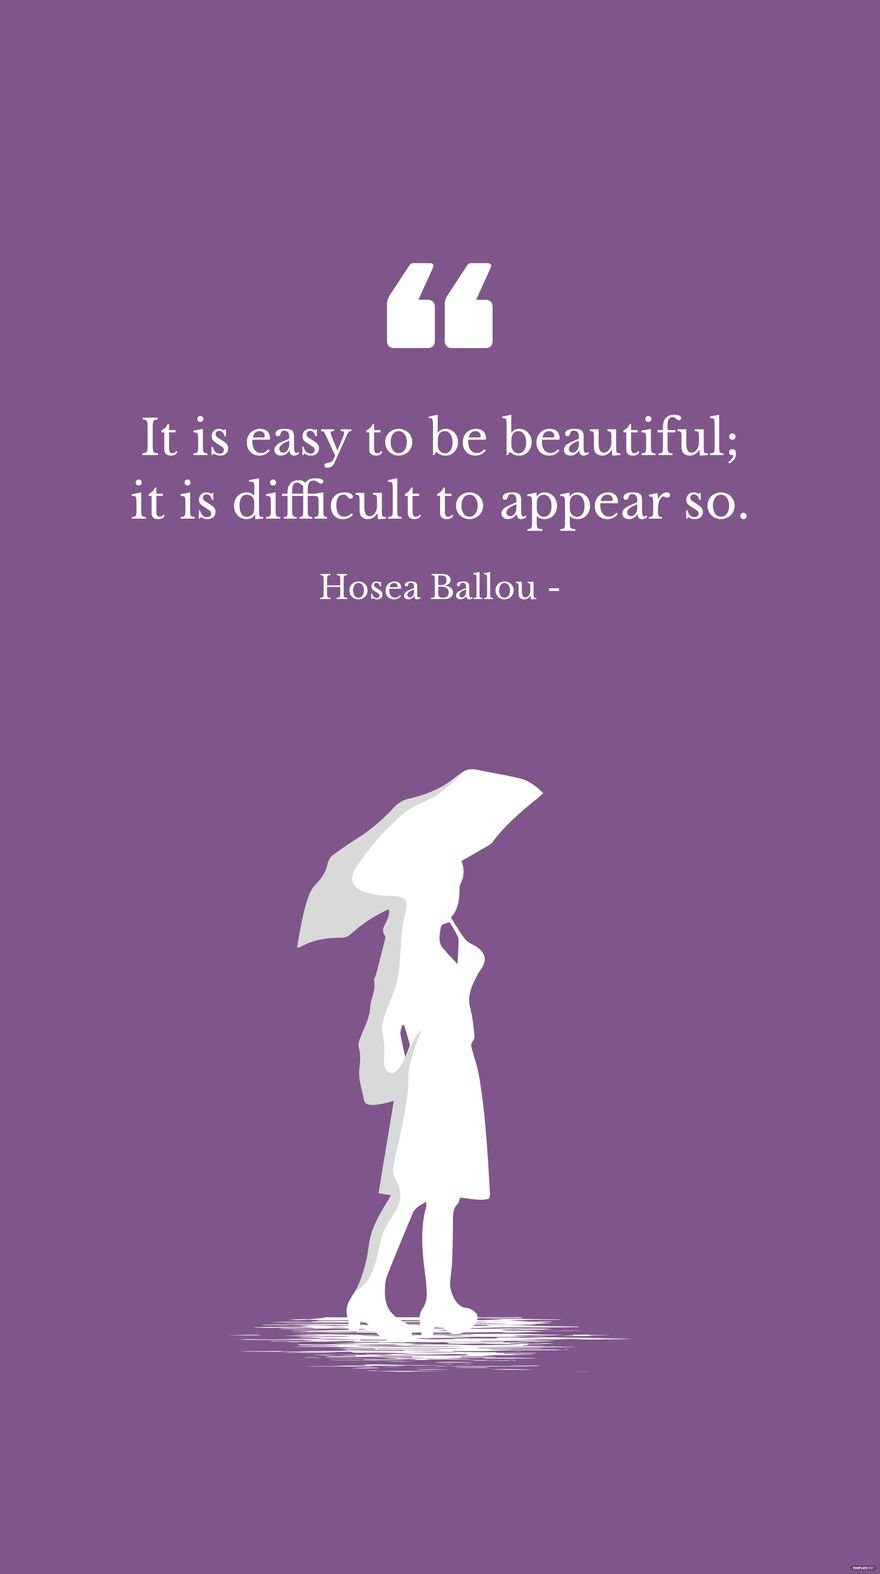 Free Hosea Ballou - It is easy to be beautiful; it is difficult to appear so. in JPG